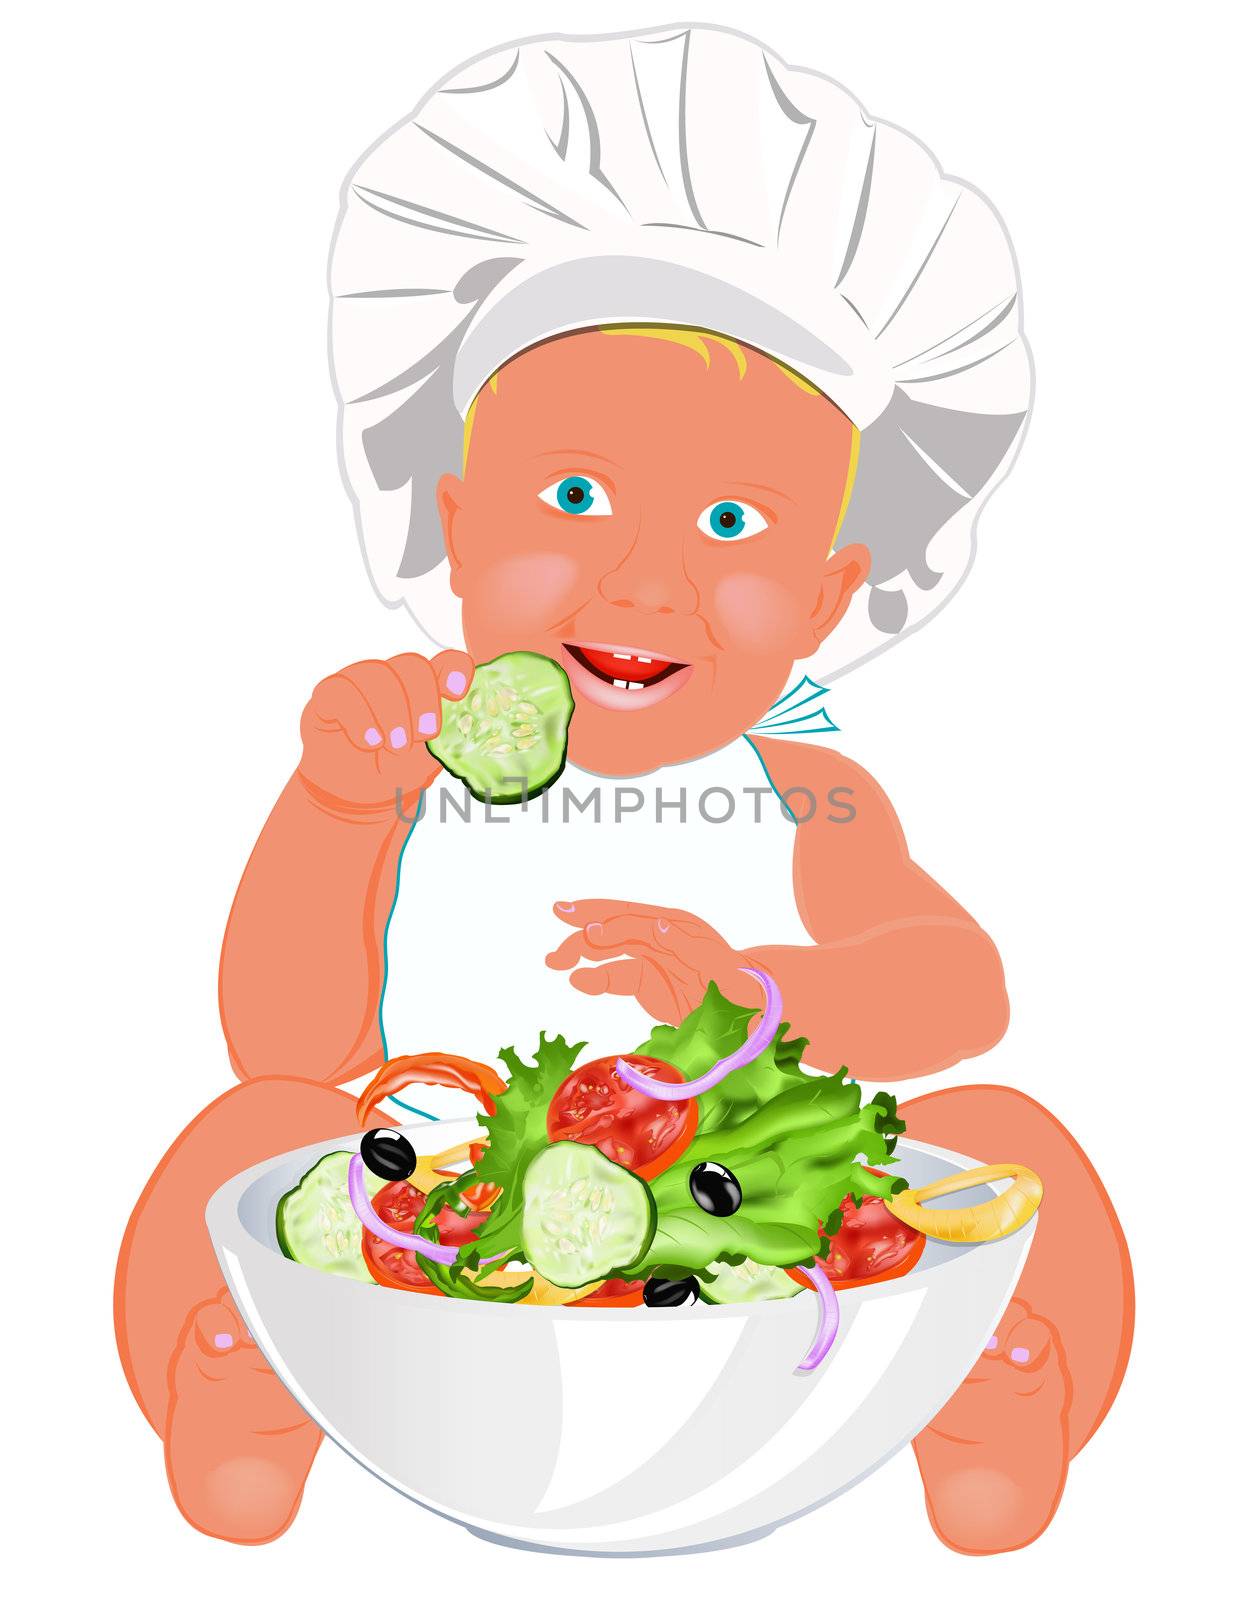 Chef Child and fresh vegetable salad on a white background